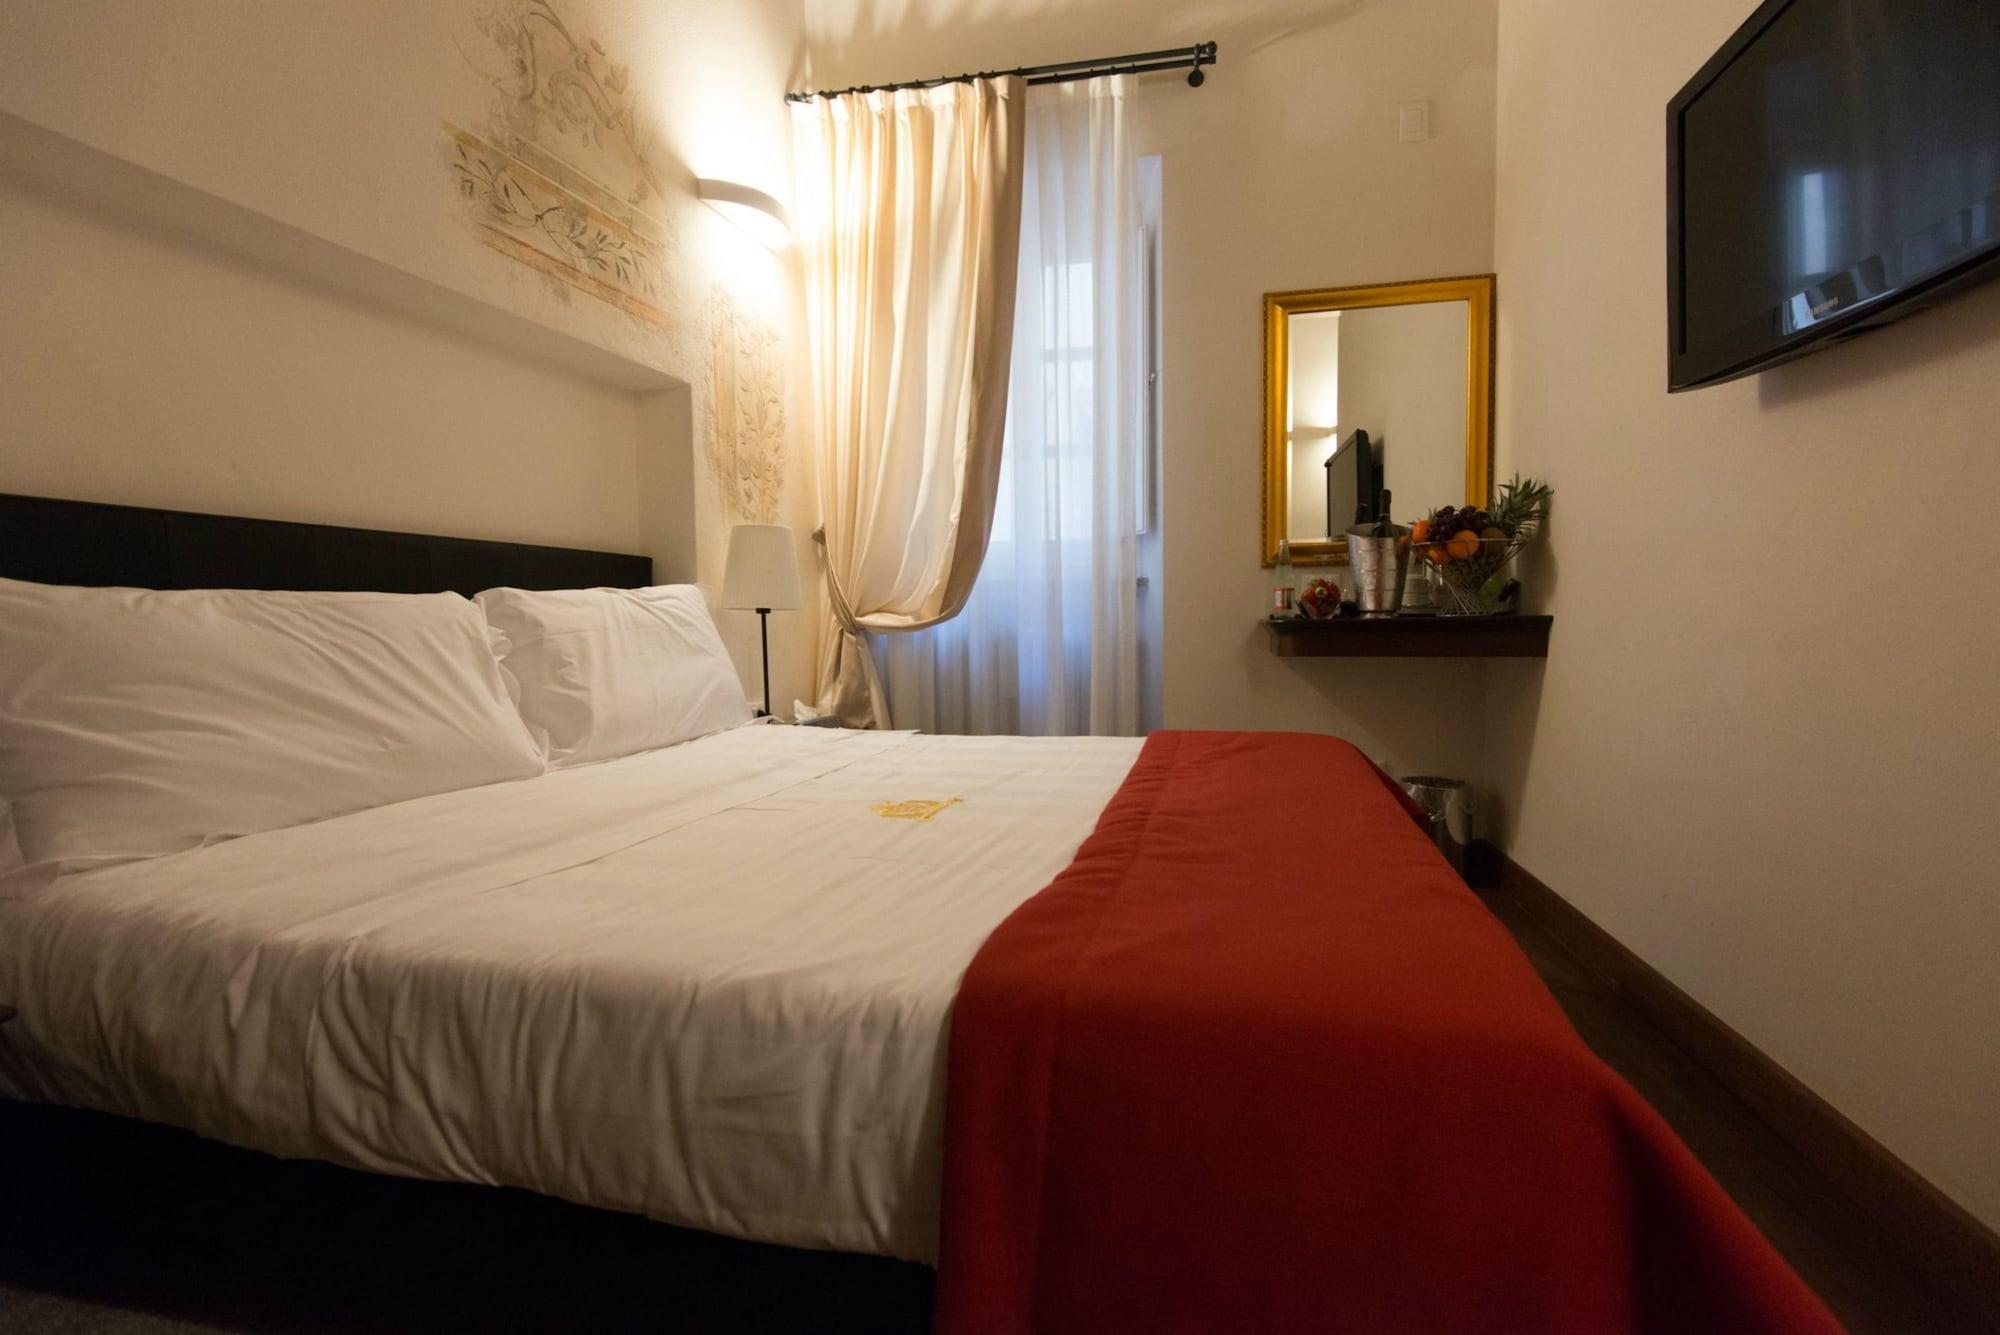 Relais Giulia Bed and Breakfast Roma Exterior foto